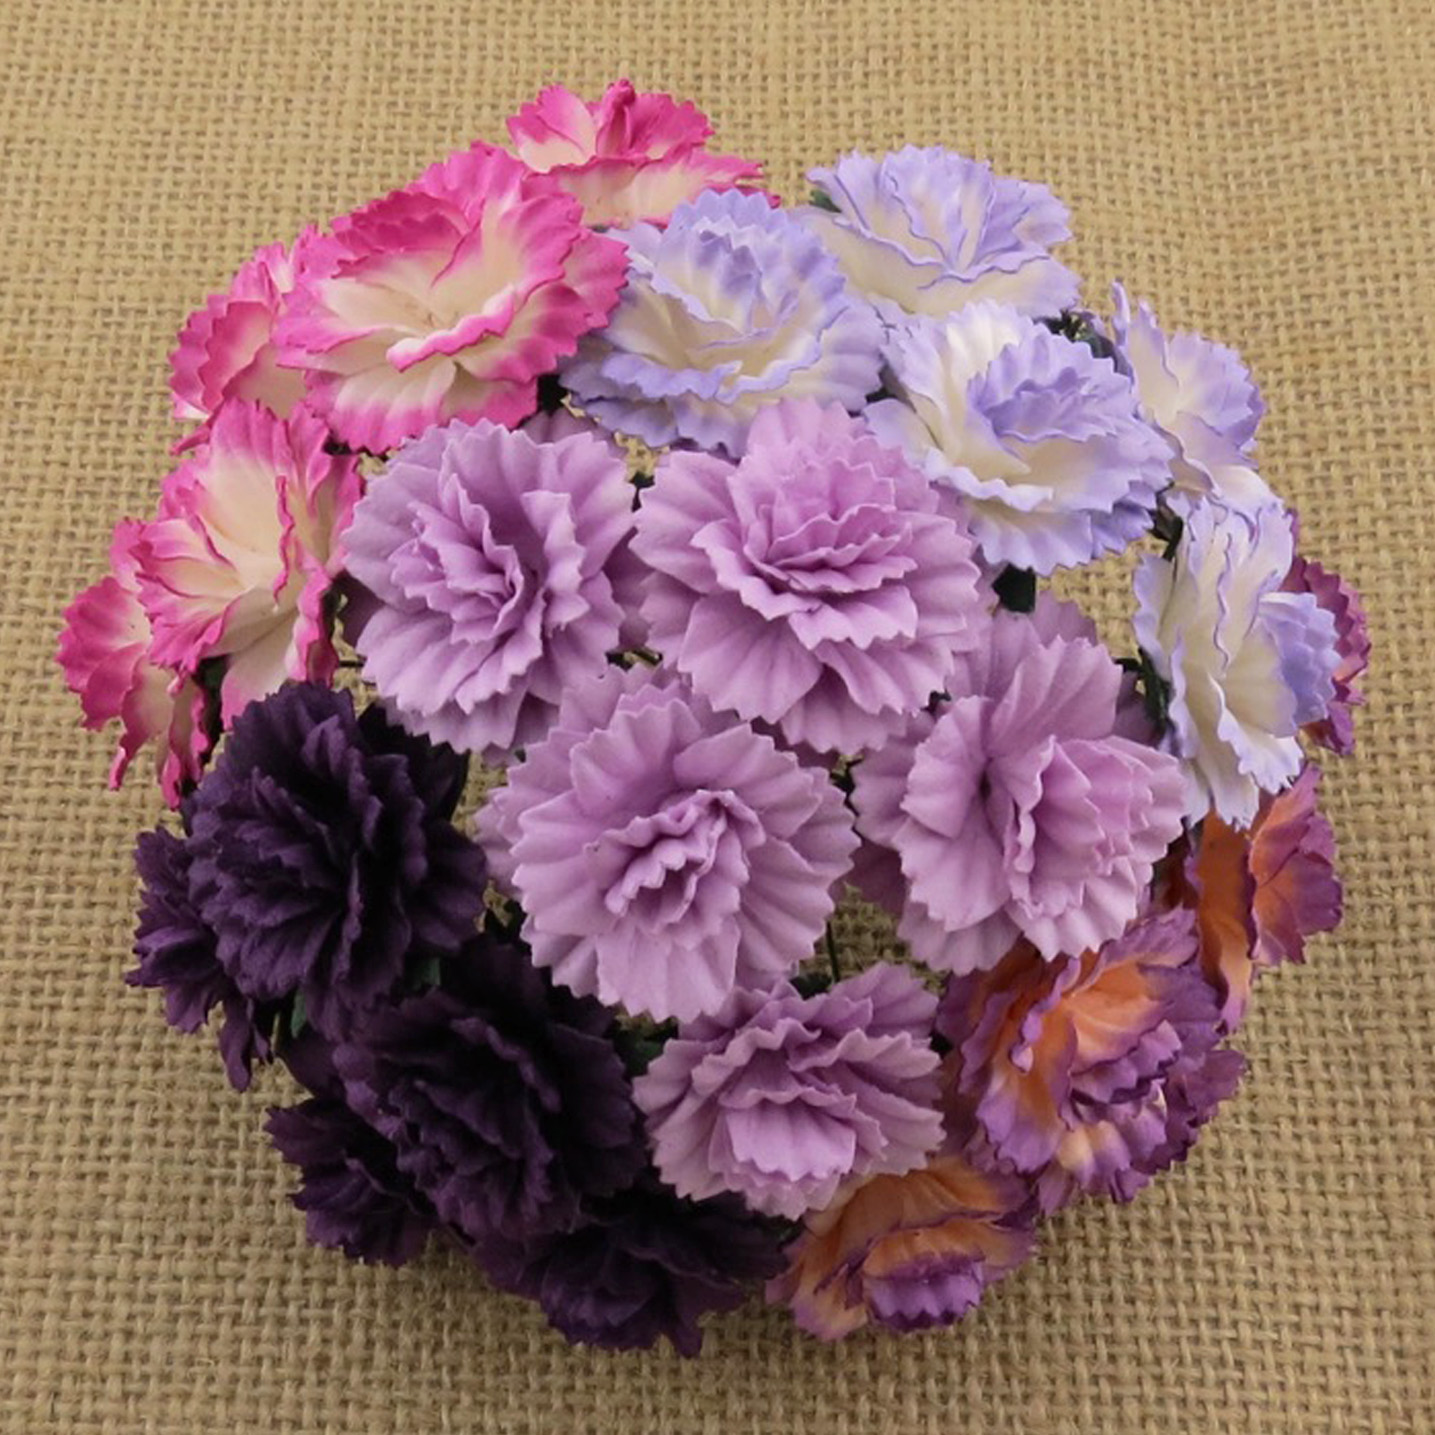 50 MIXED PURPLE/LILAC MULBERRY PAPER CARNATION FLOWERS